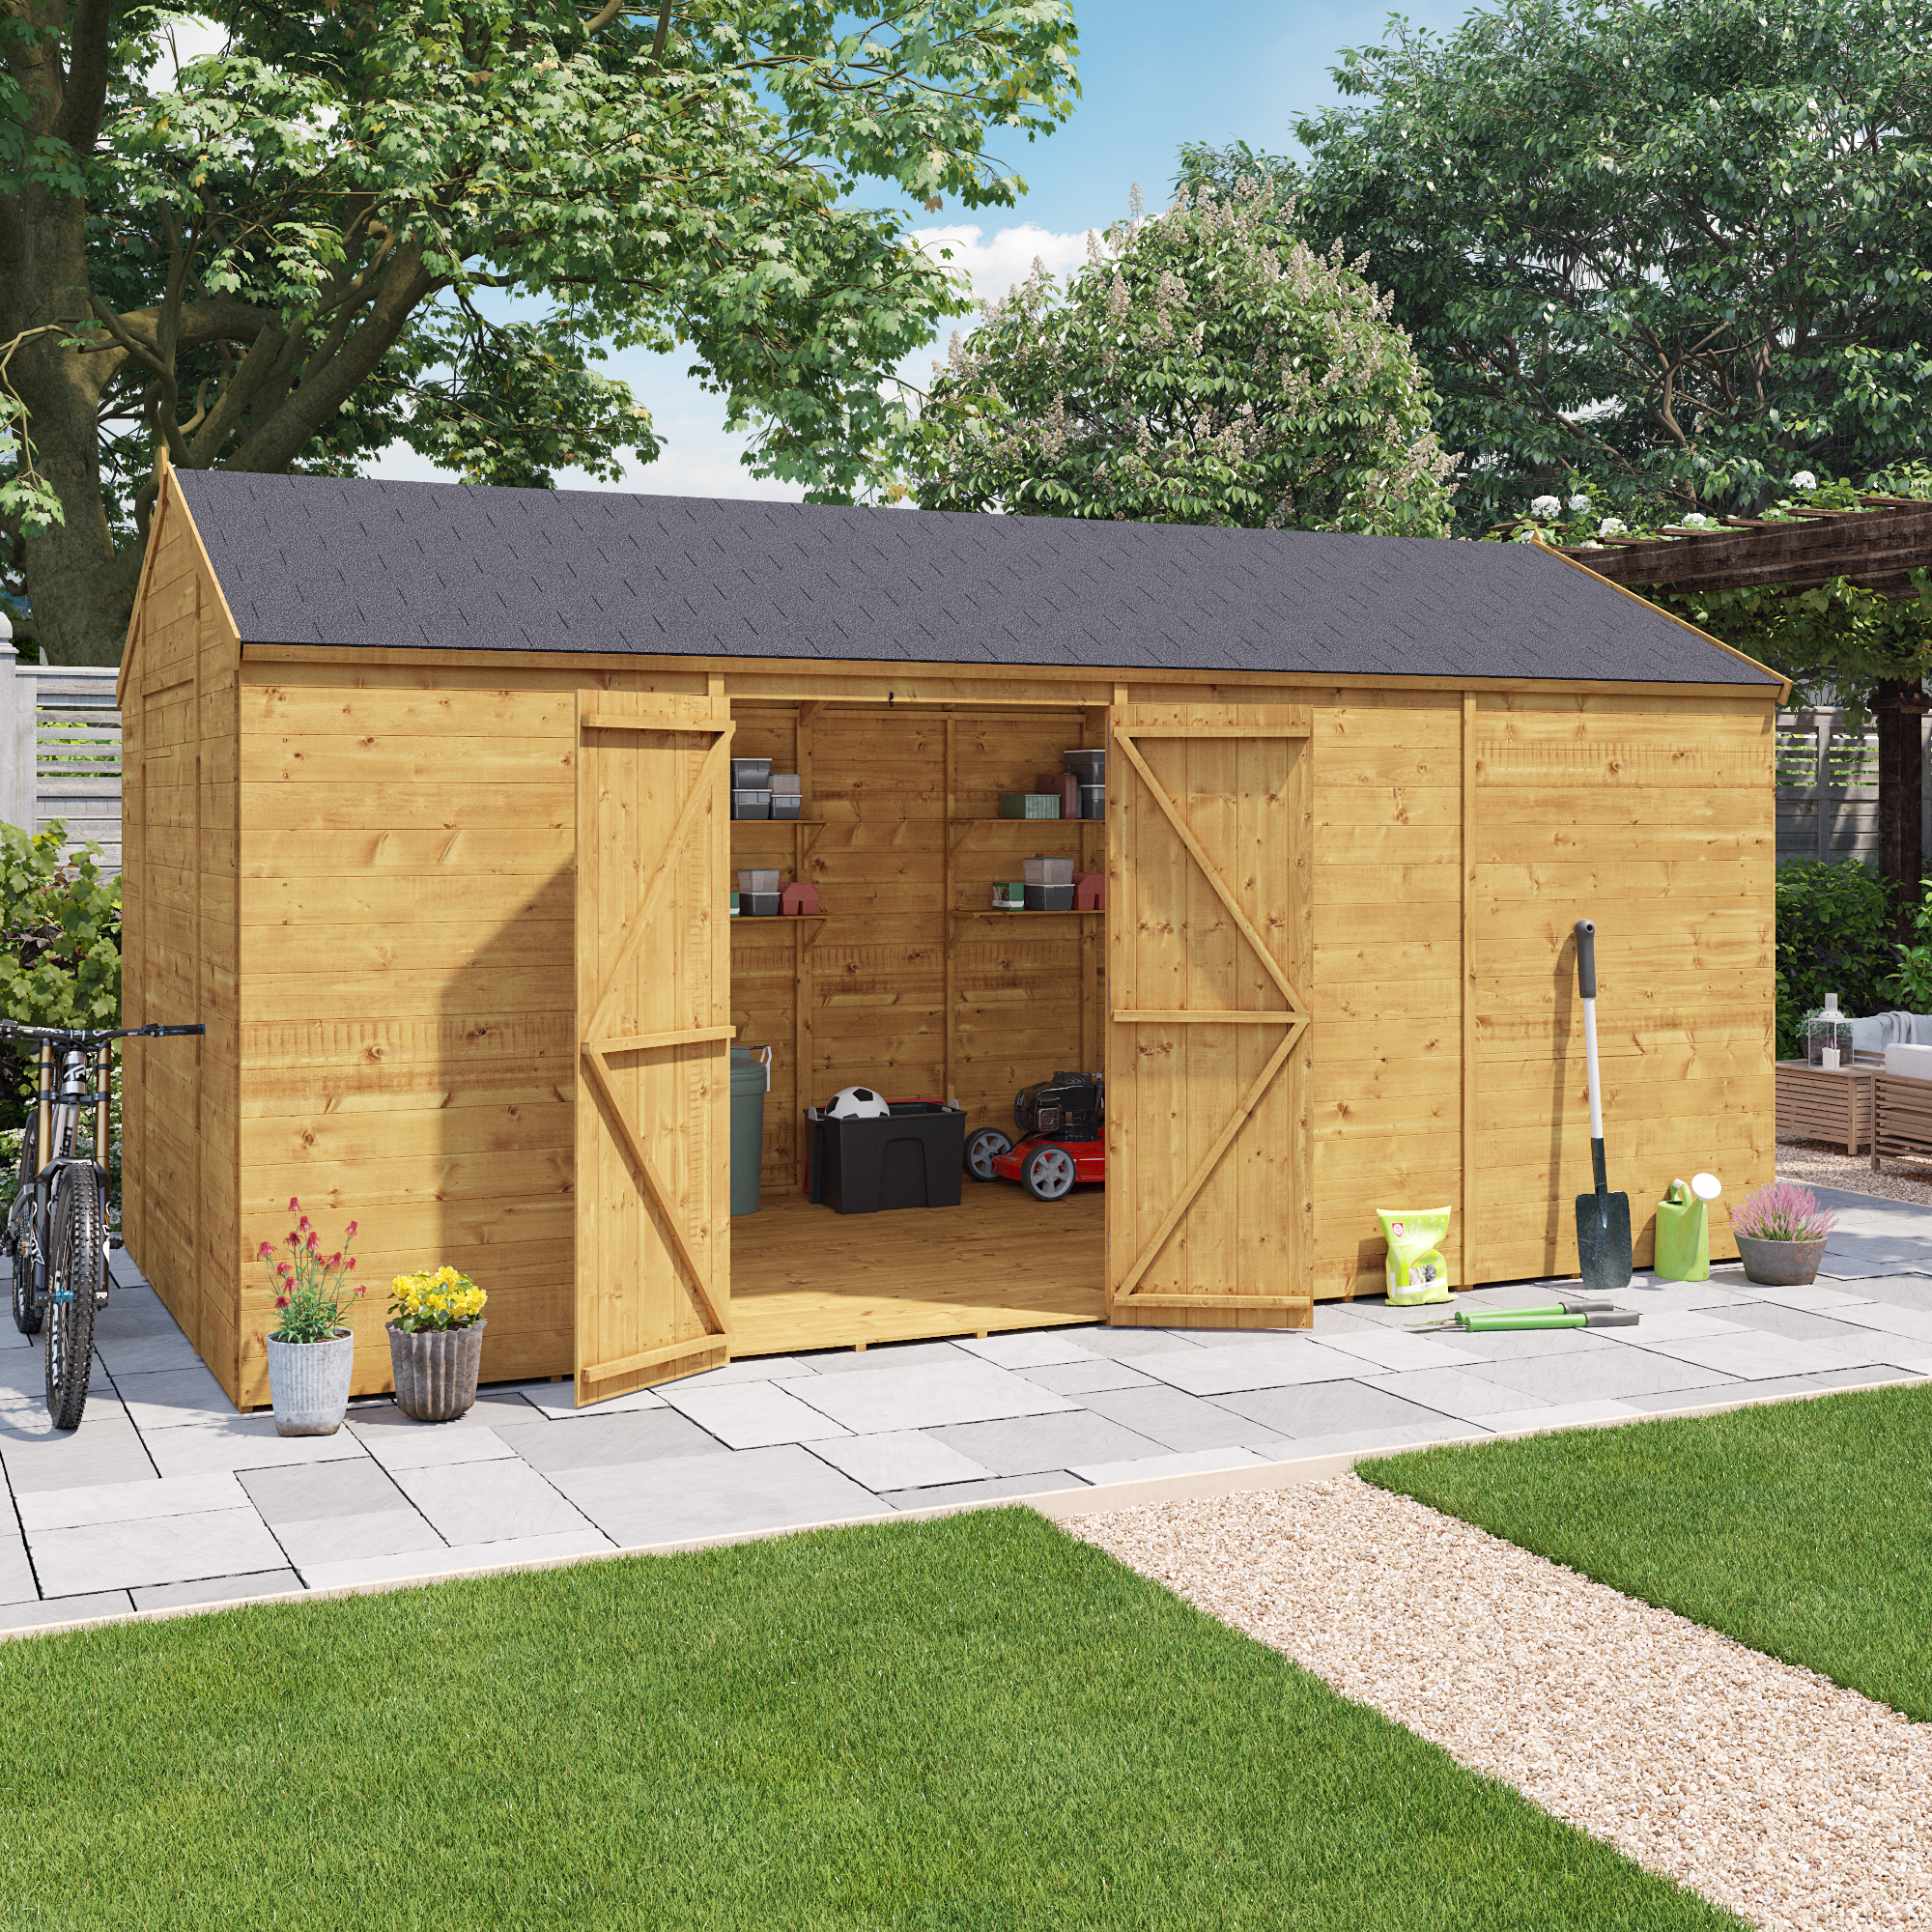 12 x 10 Pressure Treated Shed - BillyOh Expert Reverse Workshop Garden Shed - Windowless